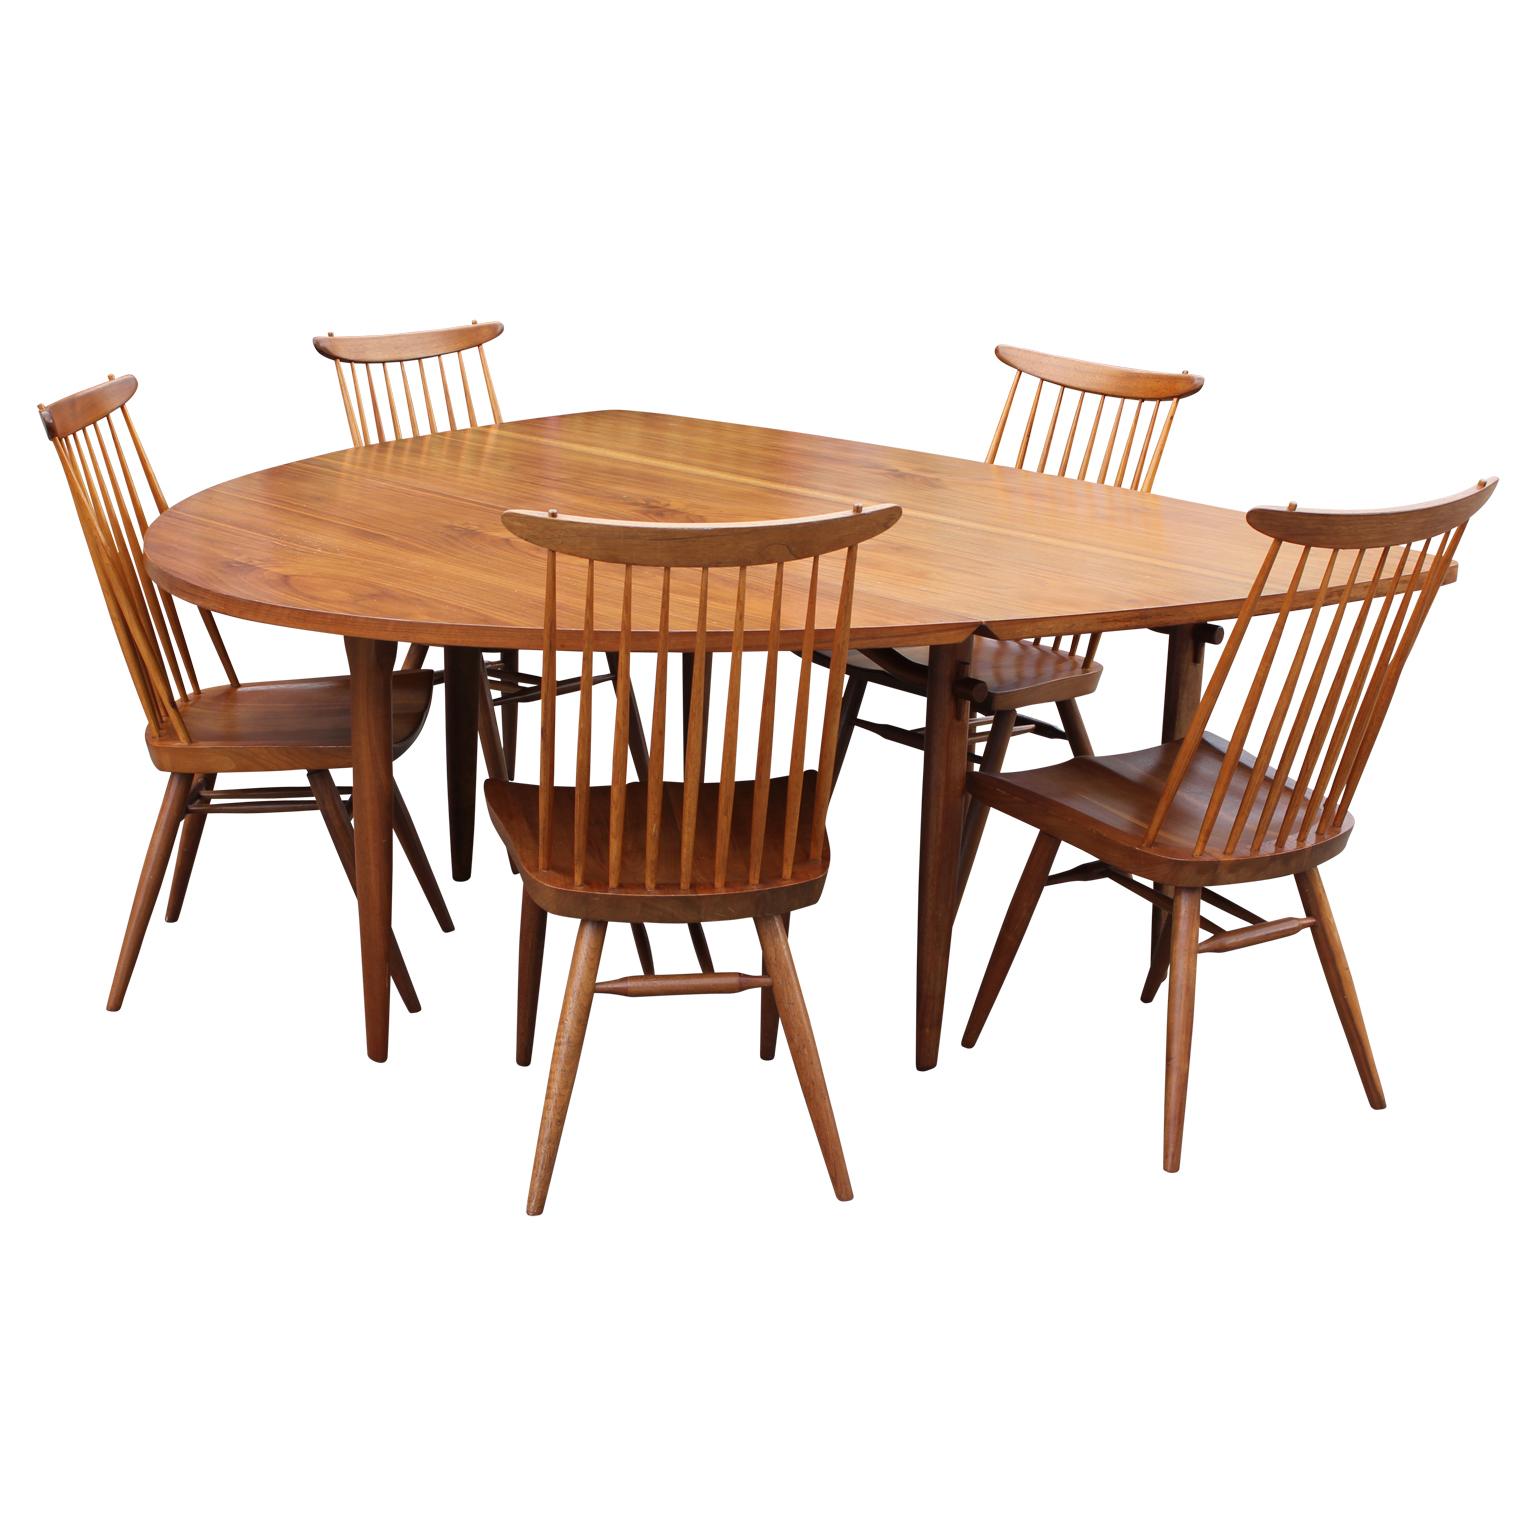 Modern George Nakashima Model 793 Widdicomb Dining Table and New Chair Set of Five